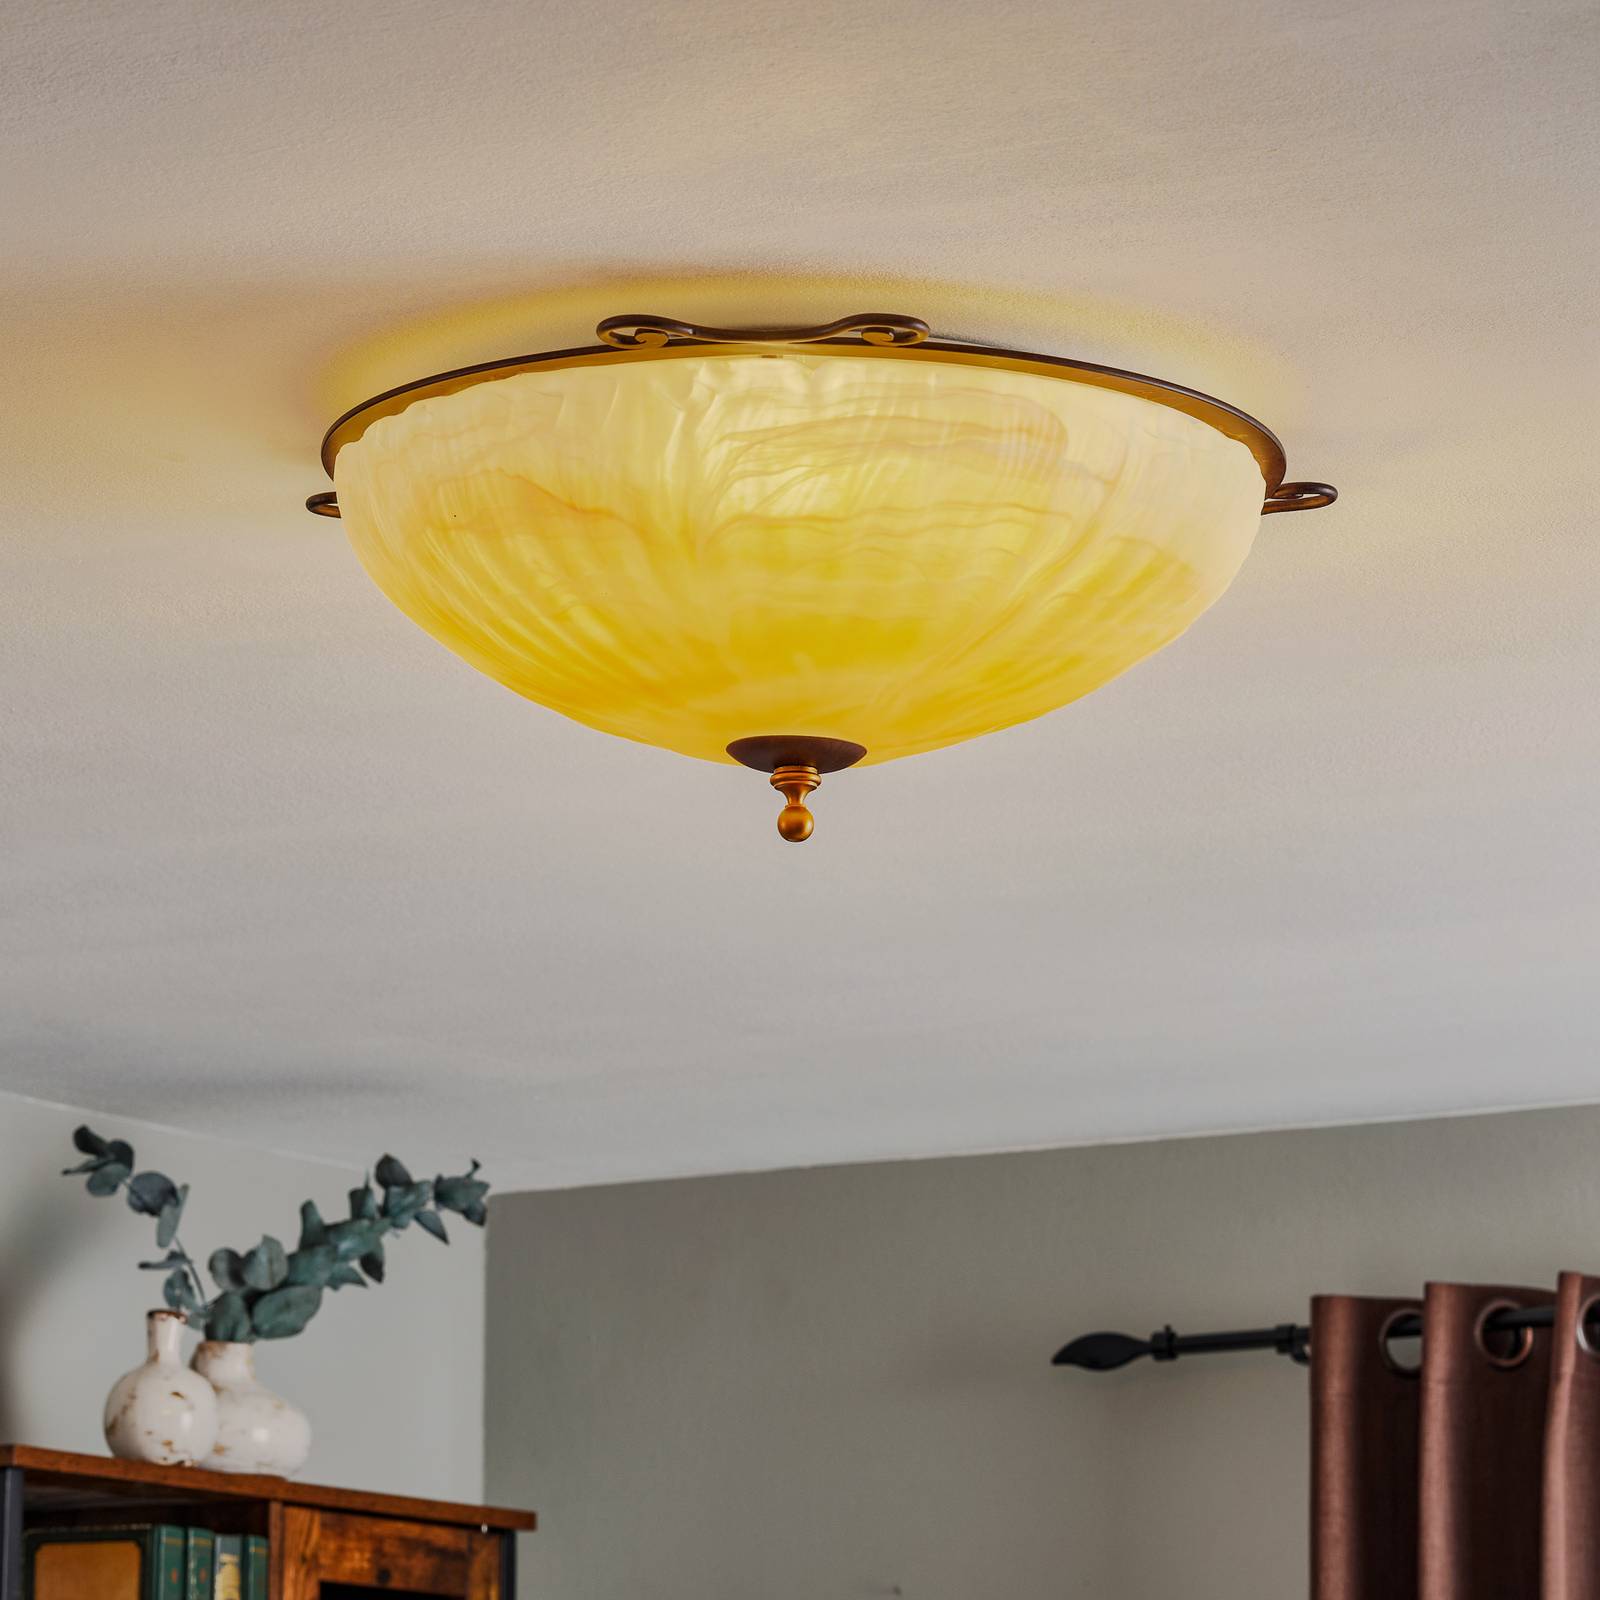 With an antique style - ceiling light Armelle